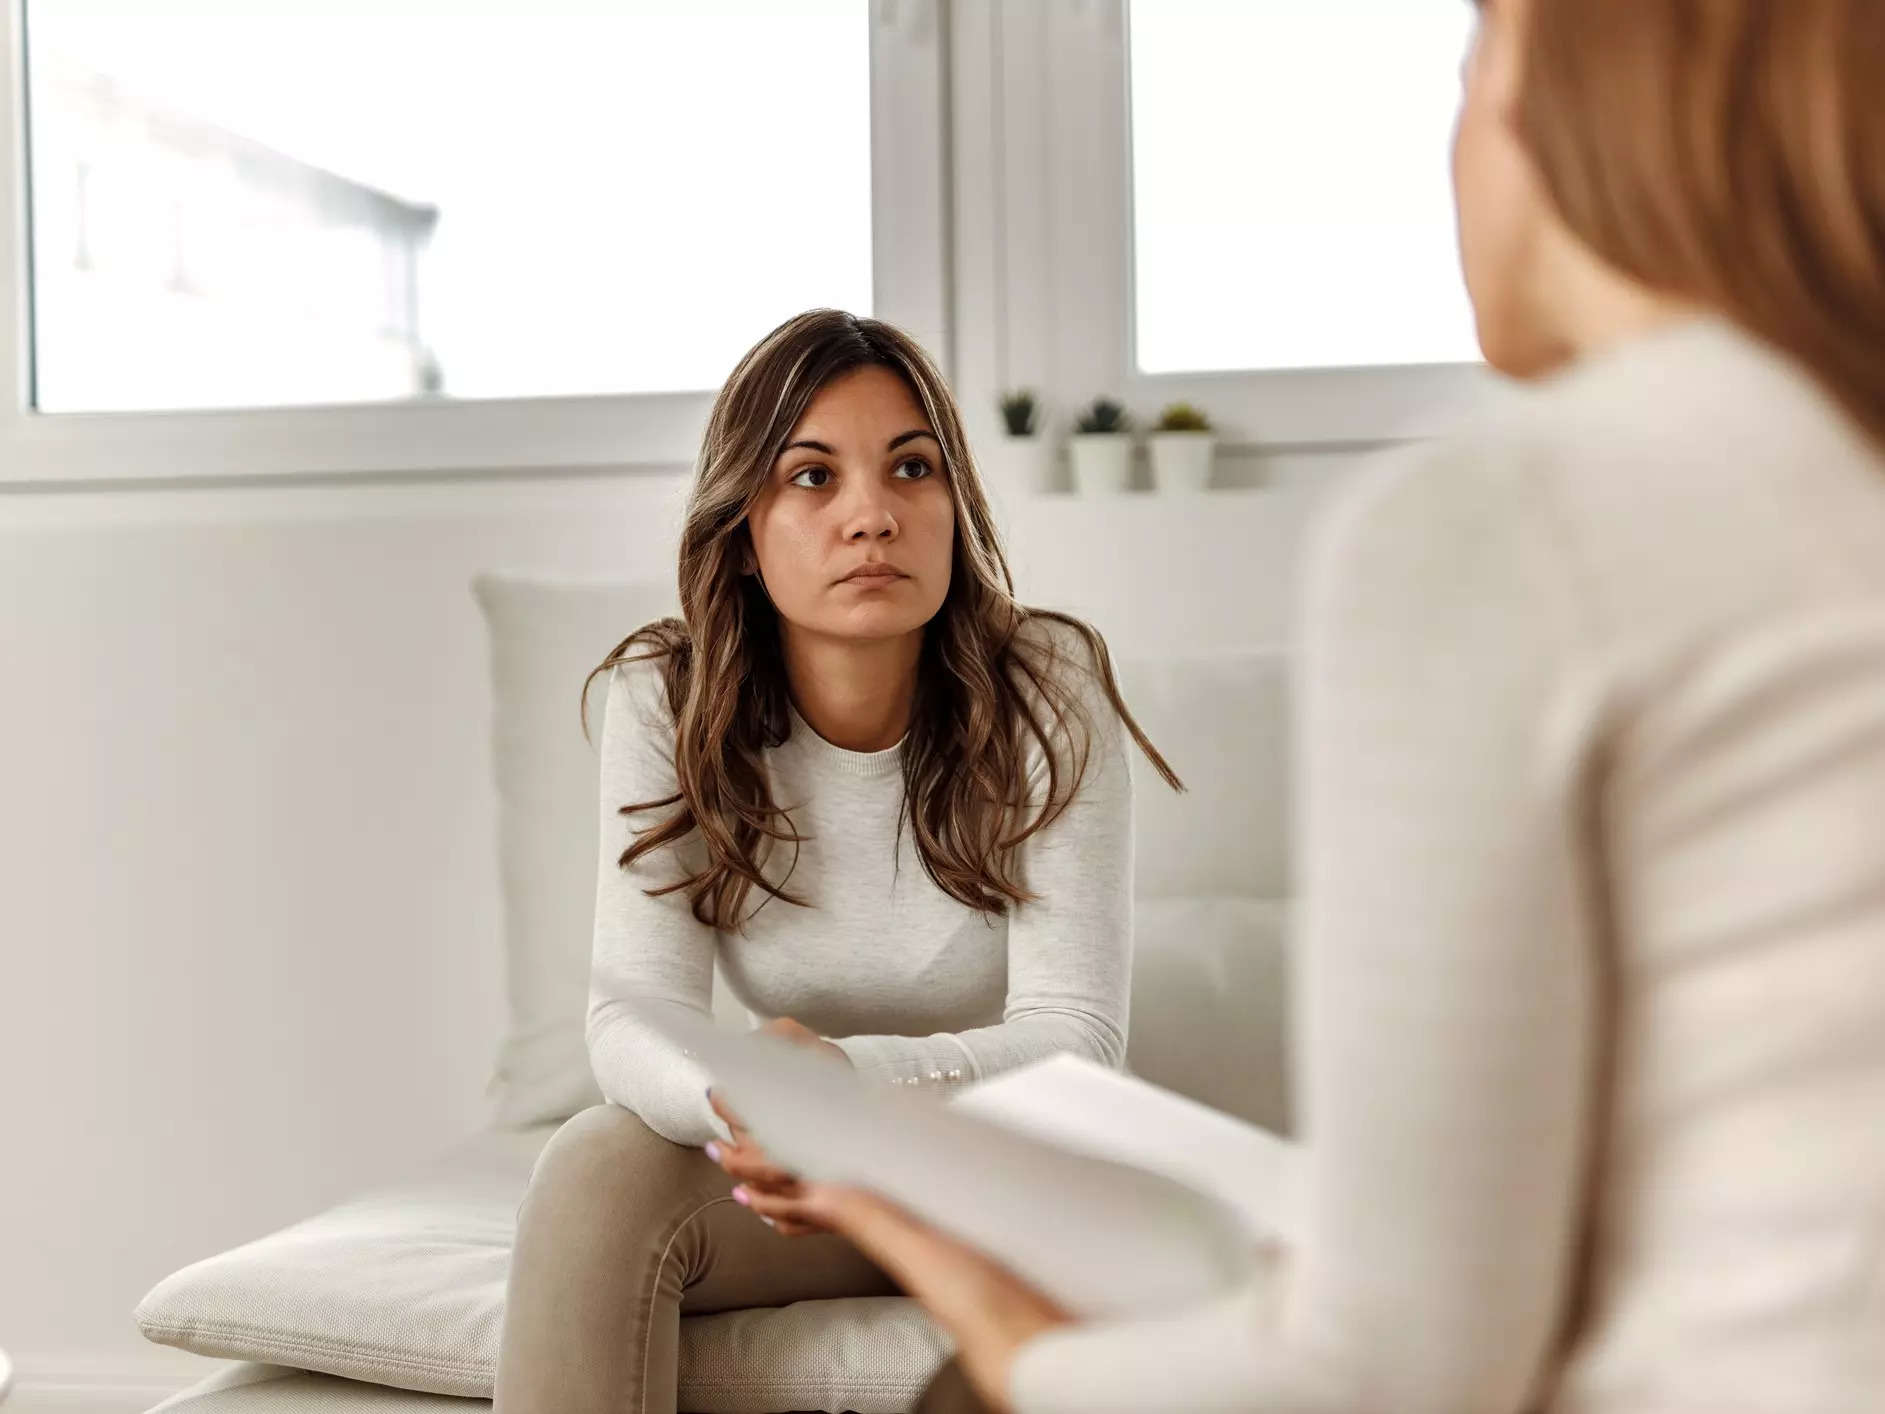 More women than men seek counselling sessions: Report 